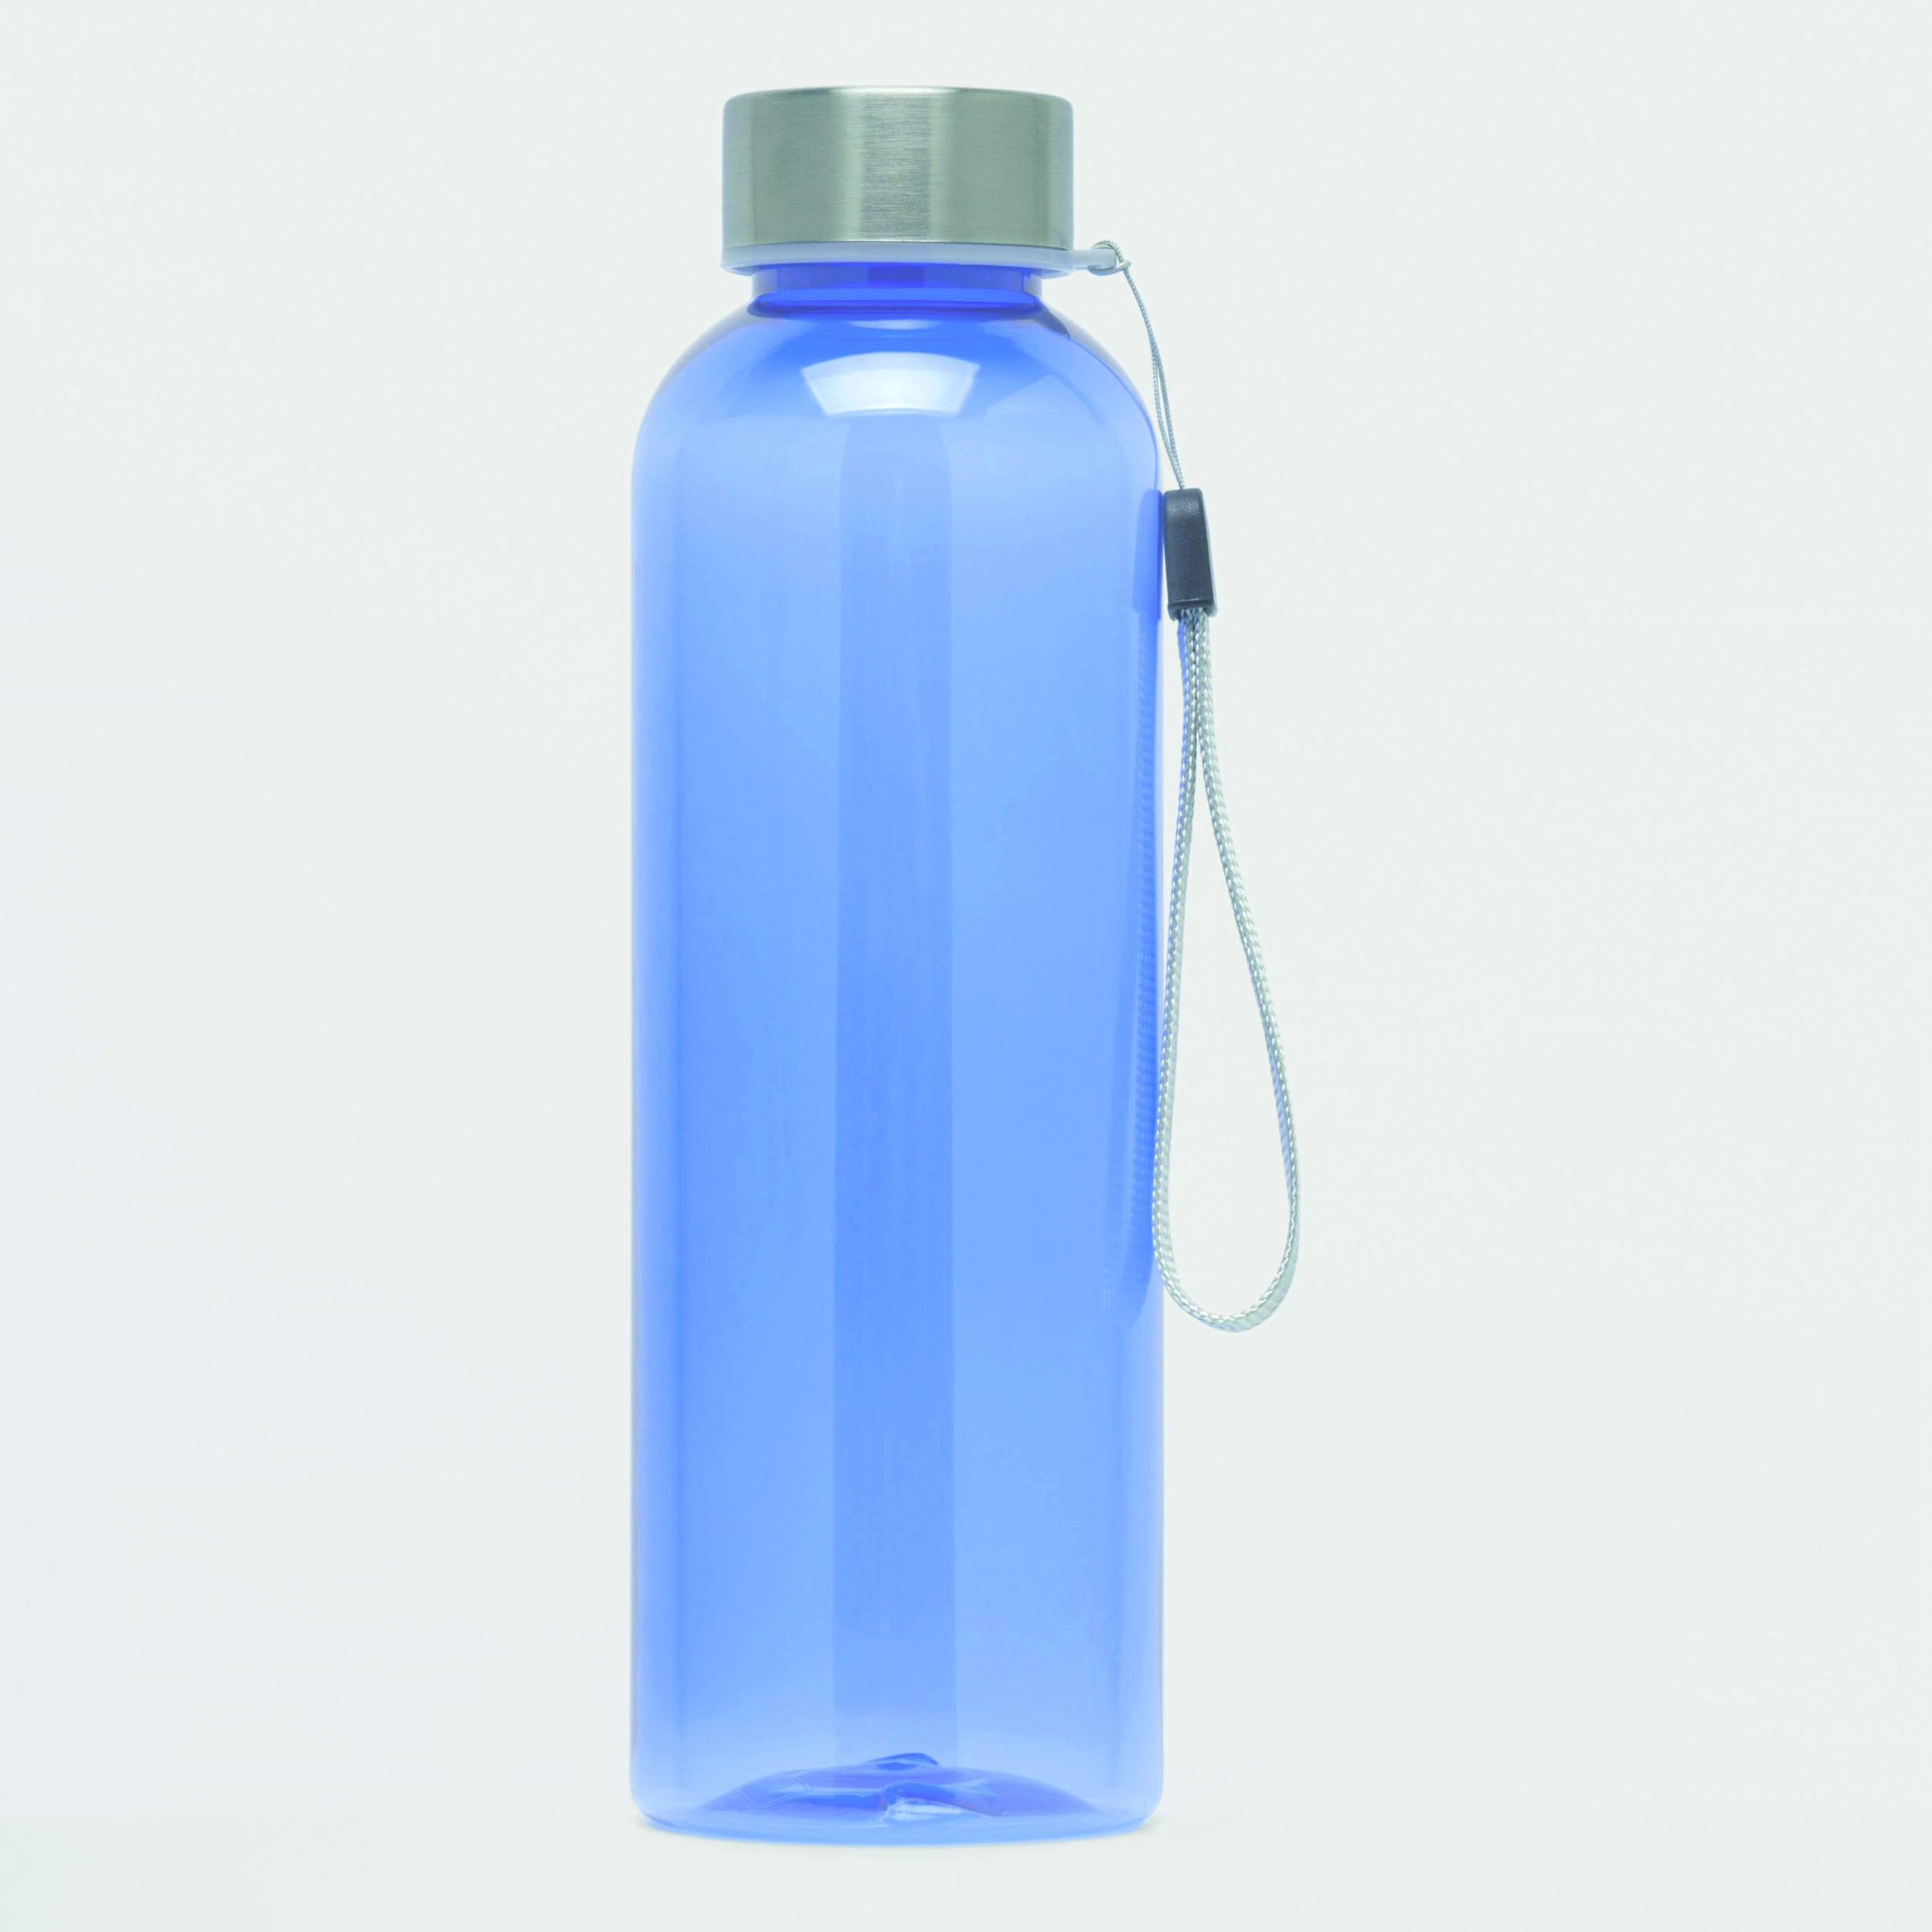 Trinkflasche SIMPLE ECO 56-0304612